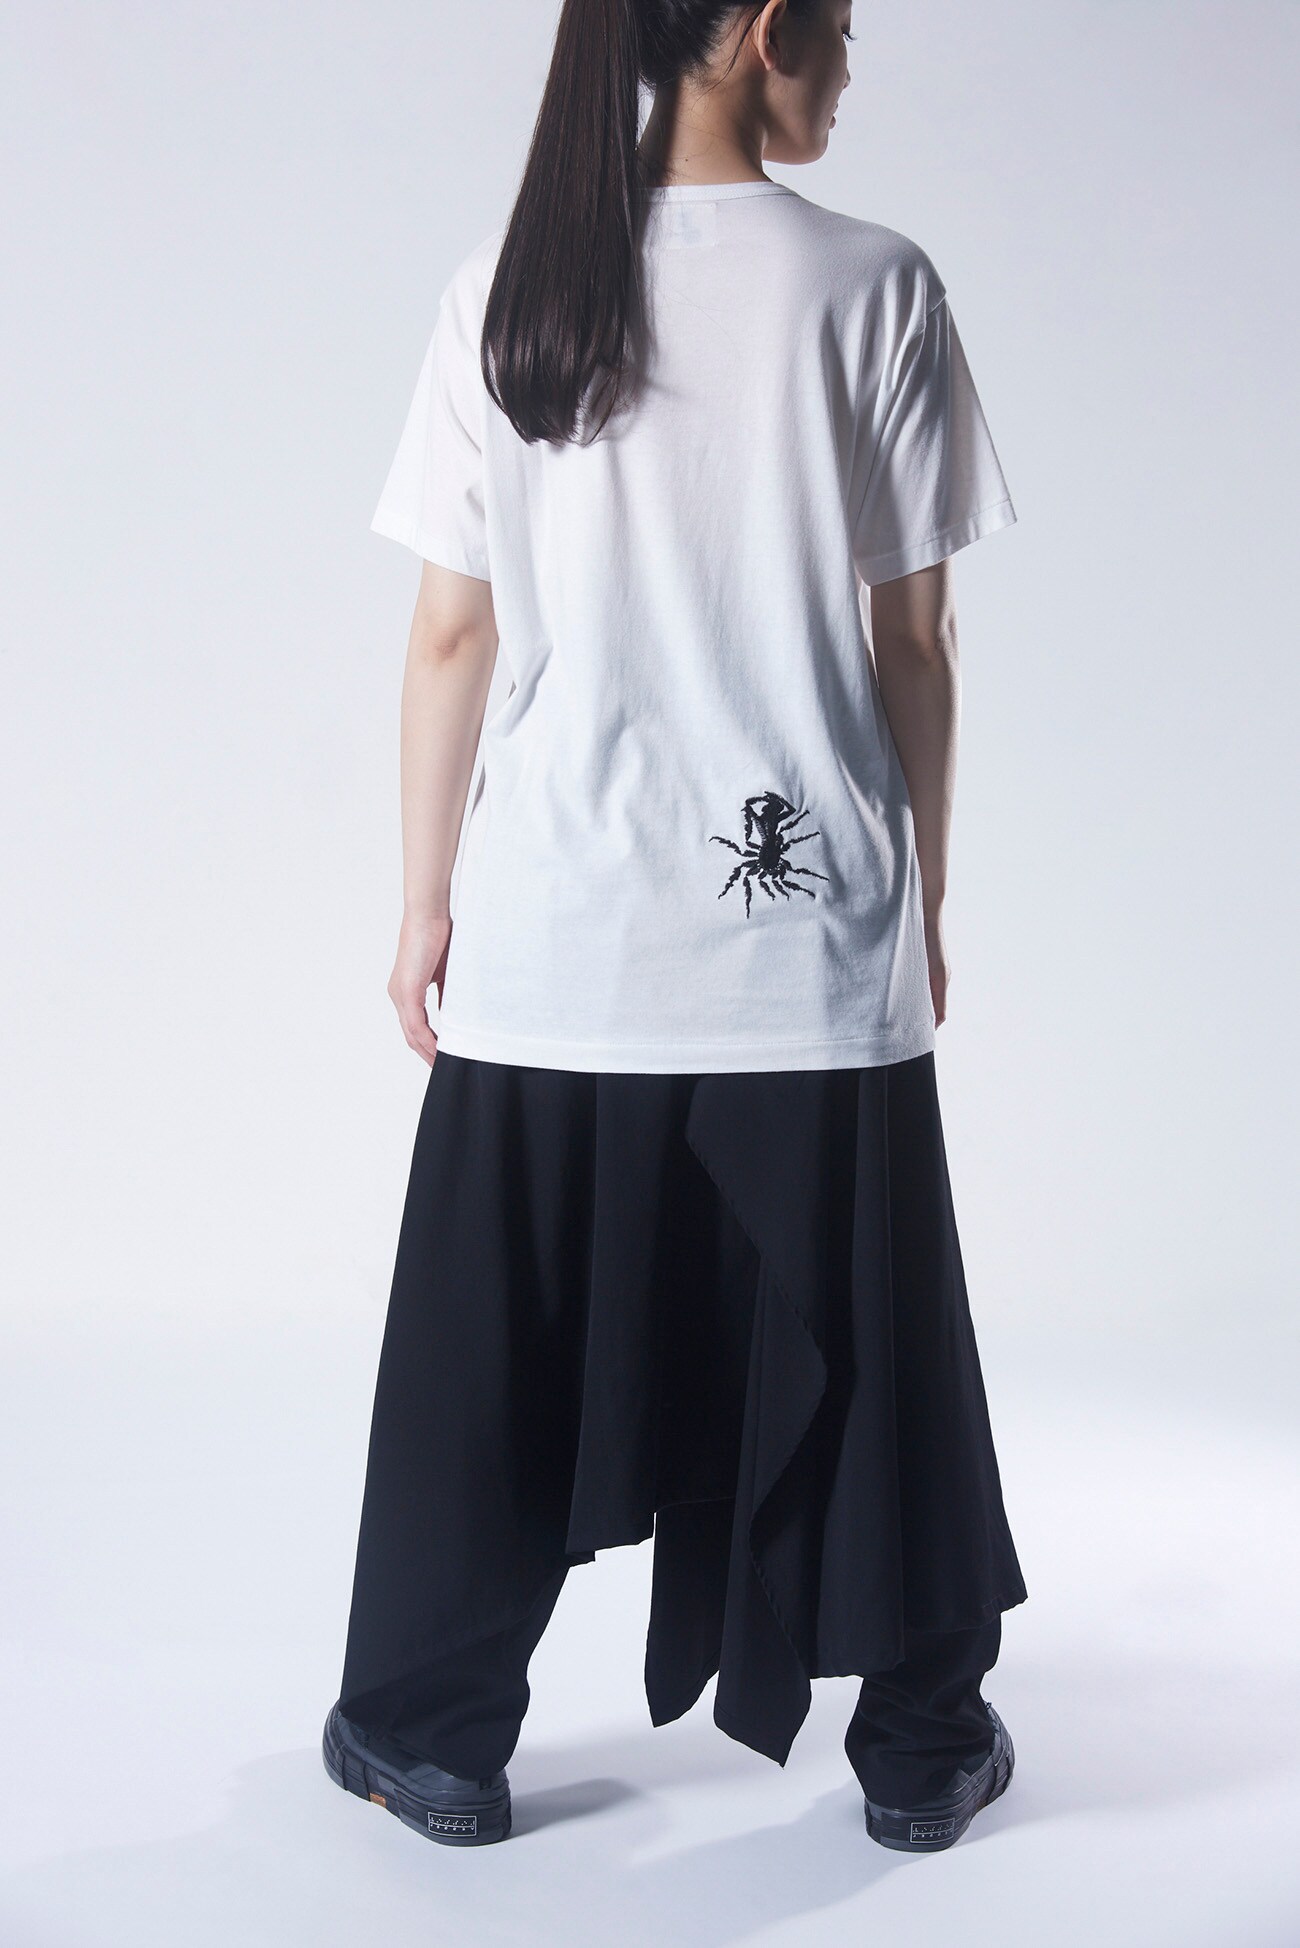 B/Cotton Embroidery S/S Tee